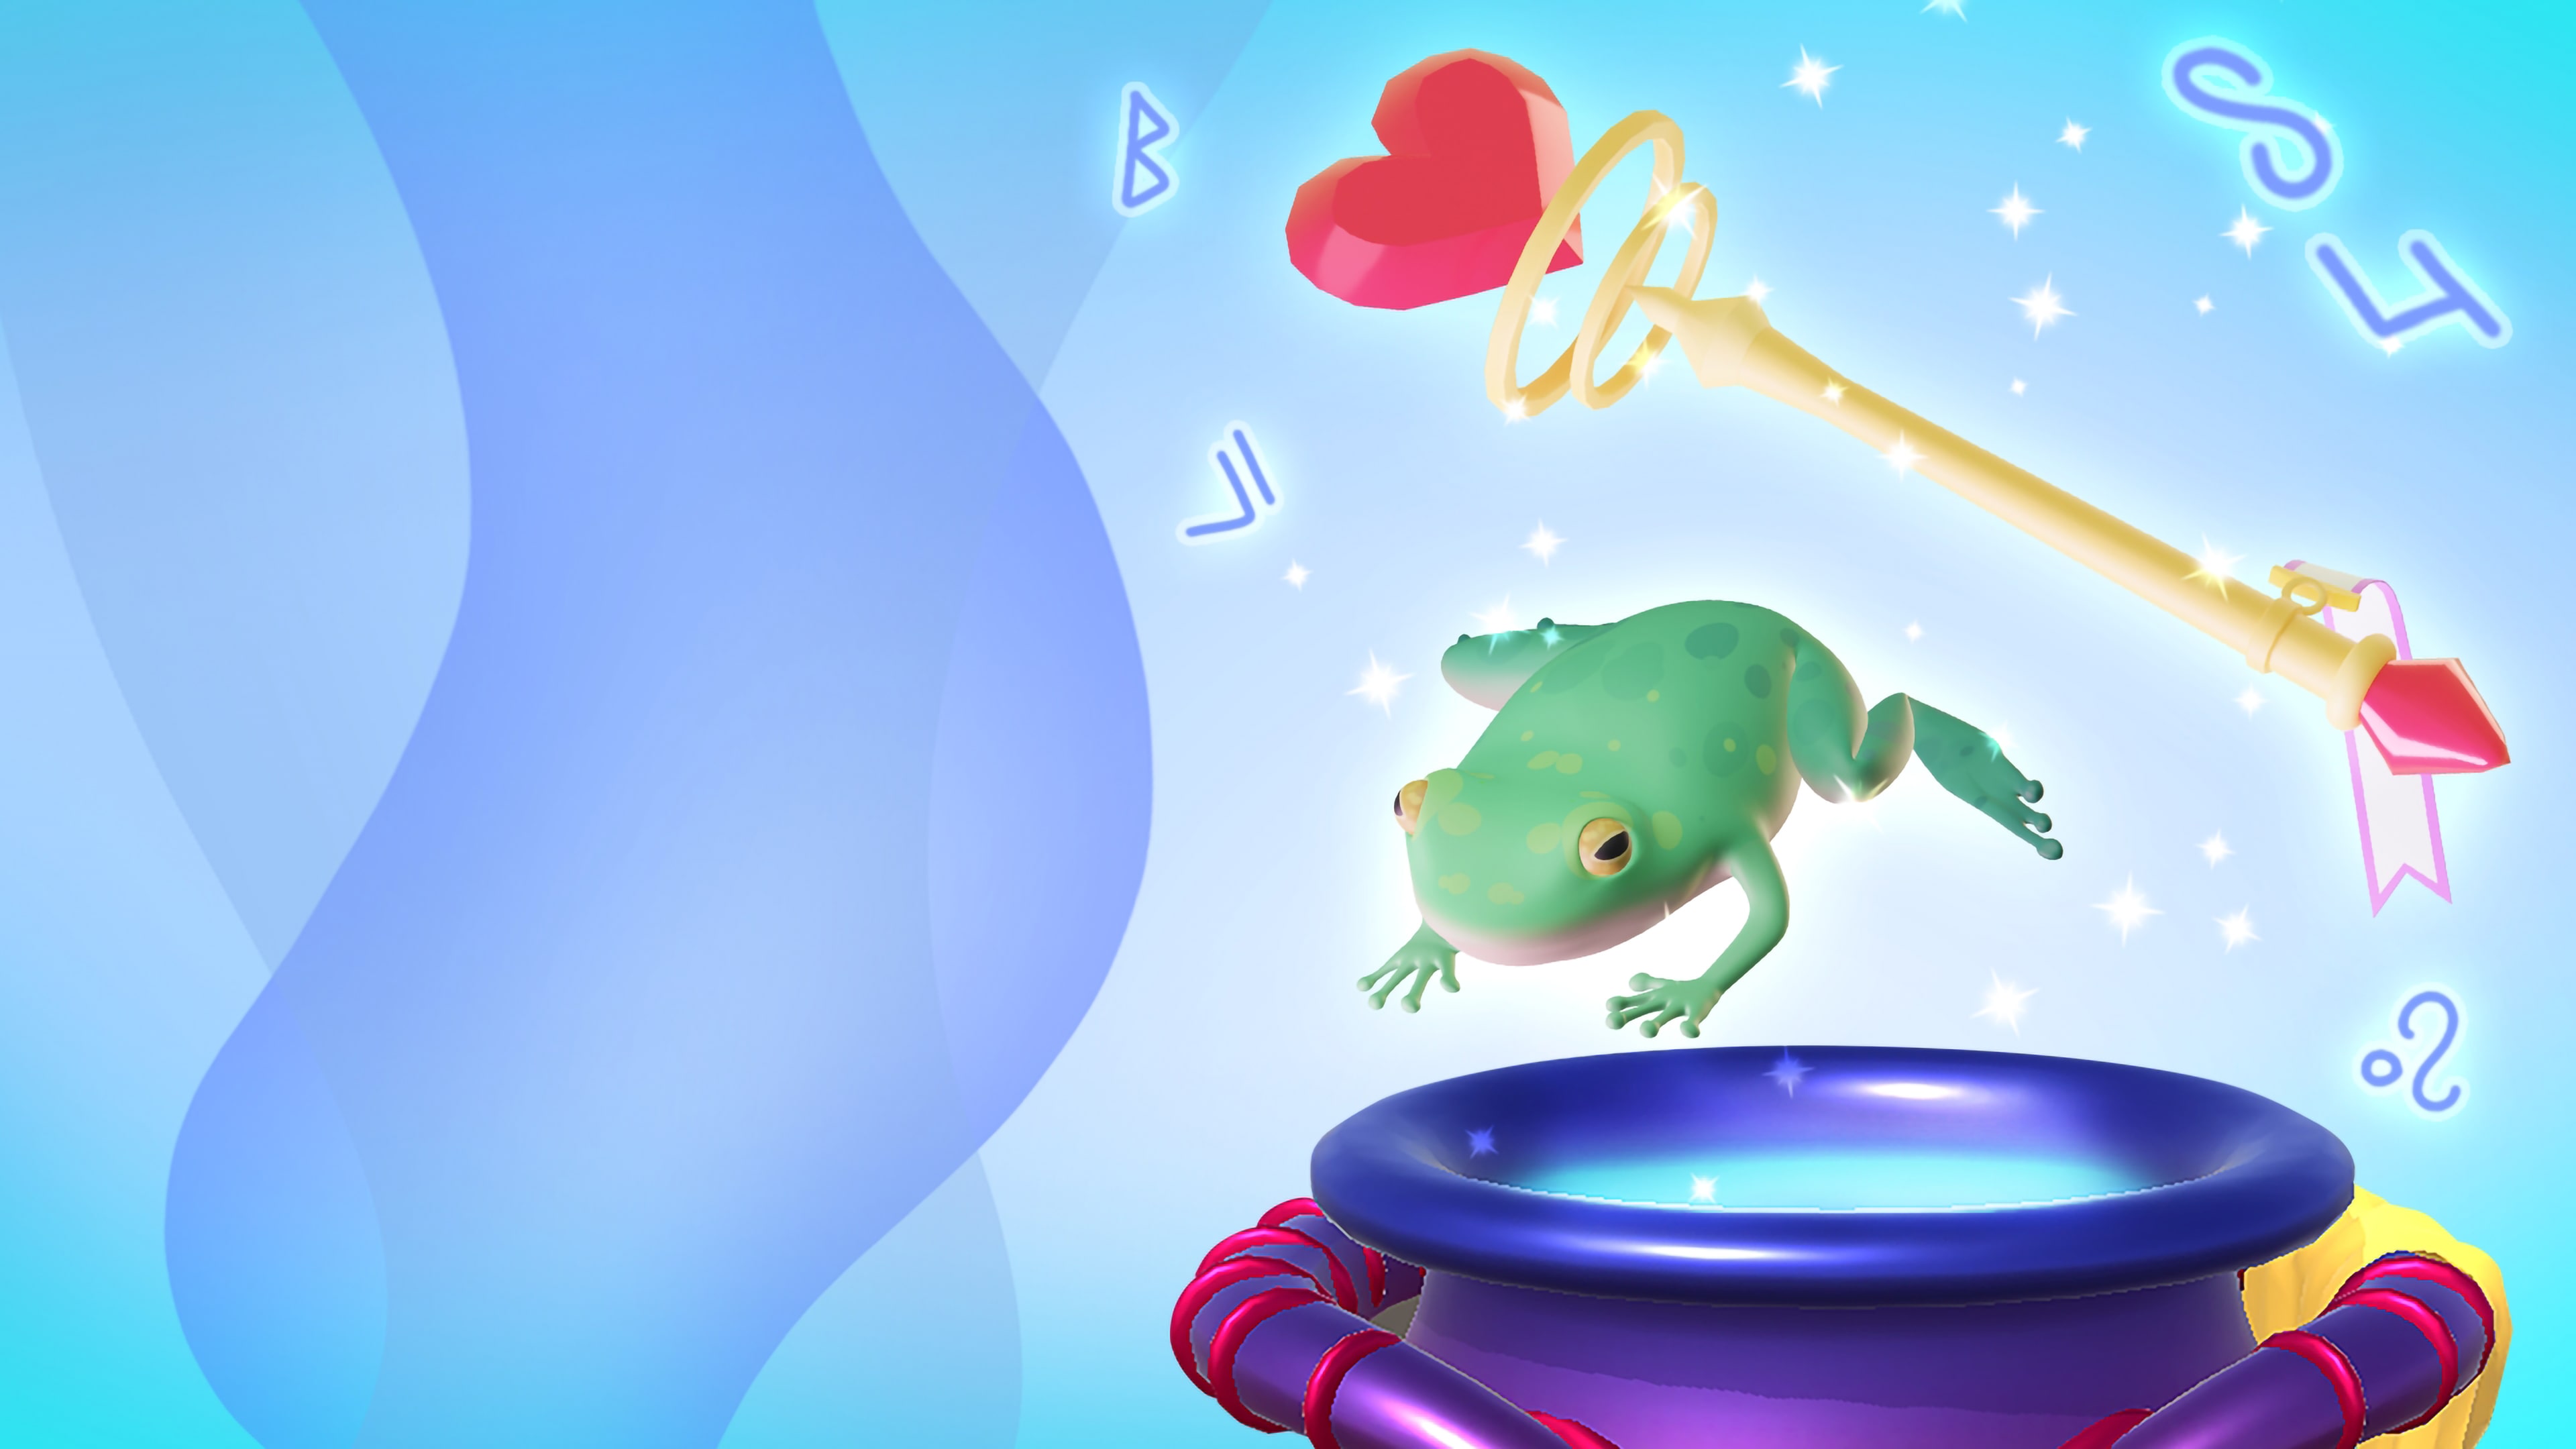 Mystical Mixing: Wand and Frog